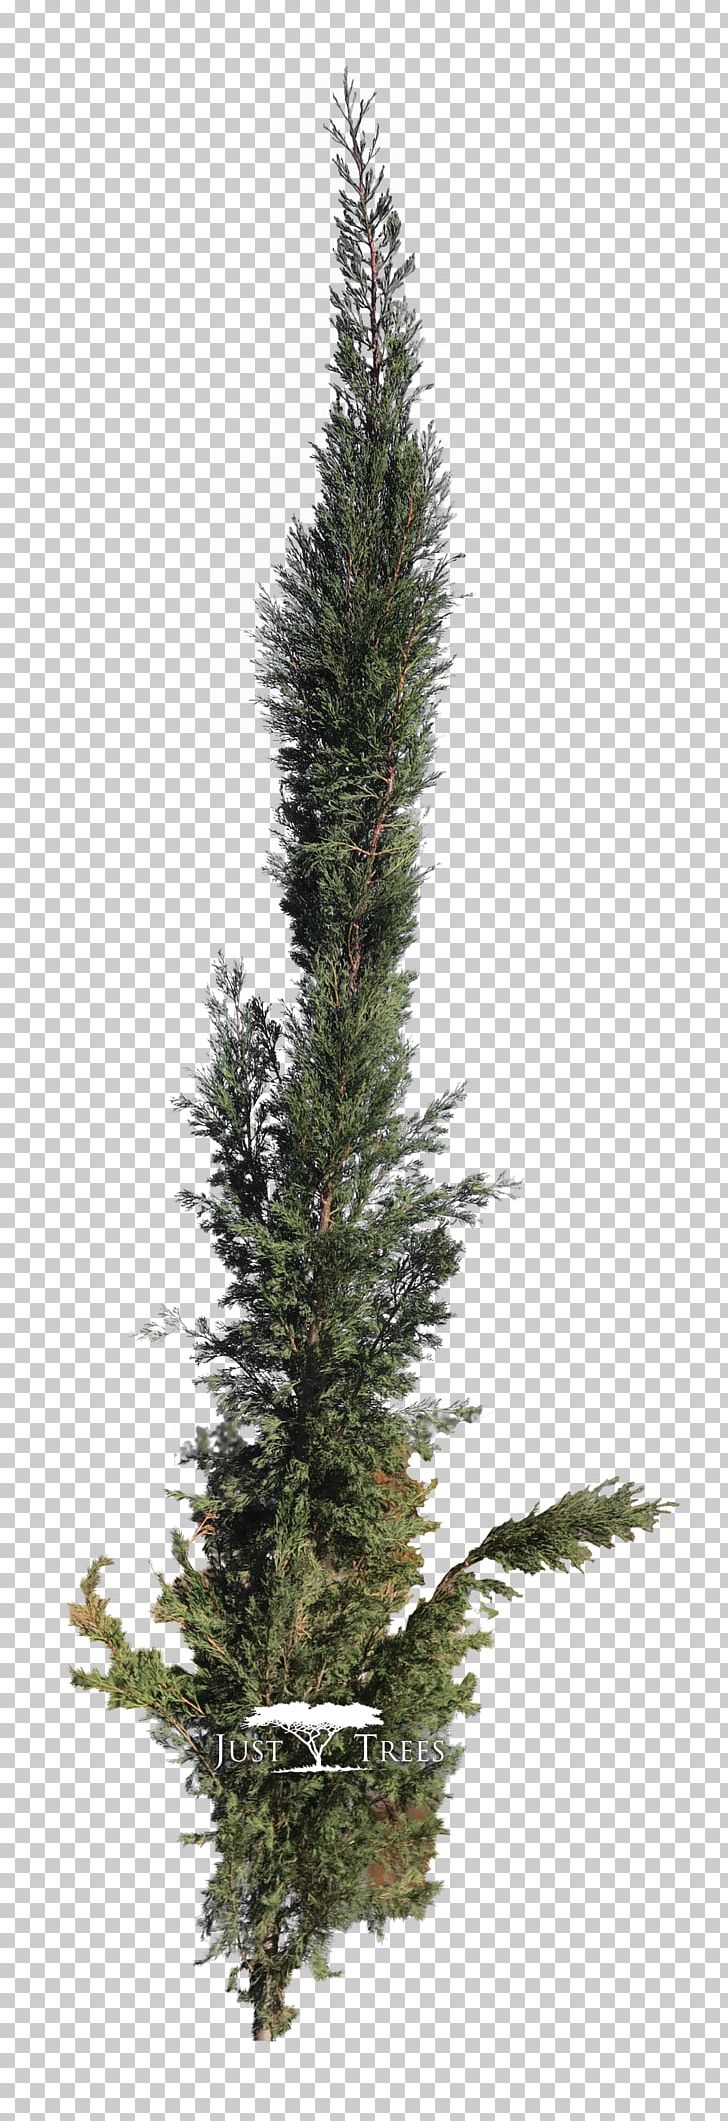 Tree Pine Evergreen Spruce Mediterranean Cypress PNG, Clipart, Christmas Decoration, Christmas Ornament, Christmas Tree, Conifer, Conifers Free PNG Download